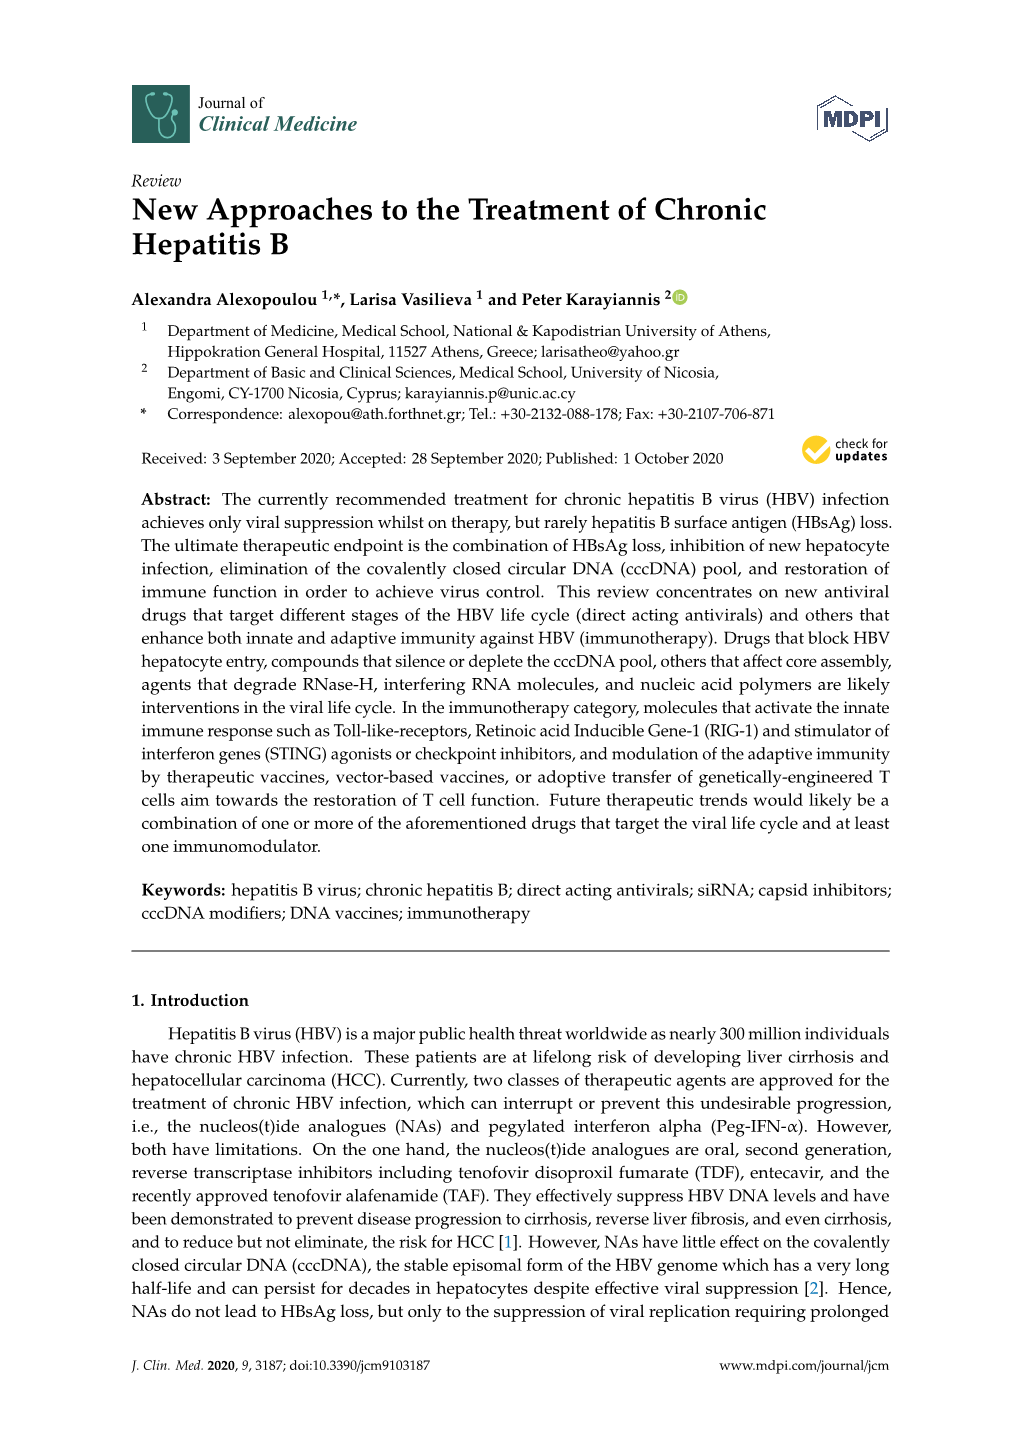 New Approaches to the Treatment of Chronic Hepatitis B